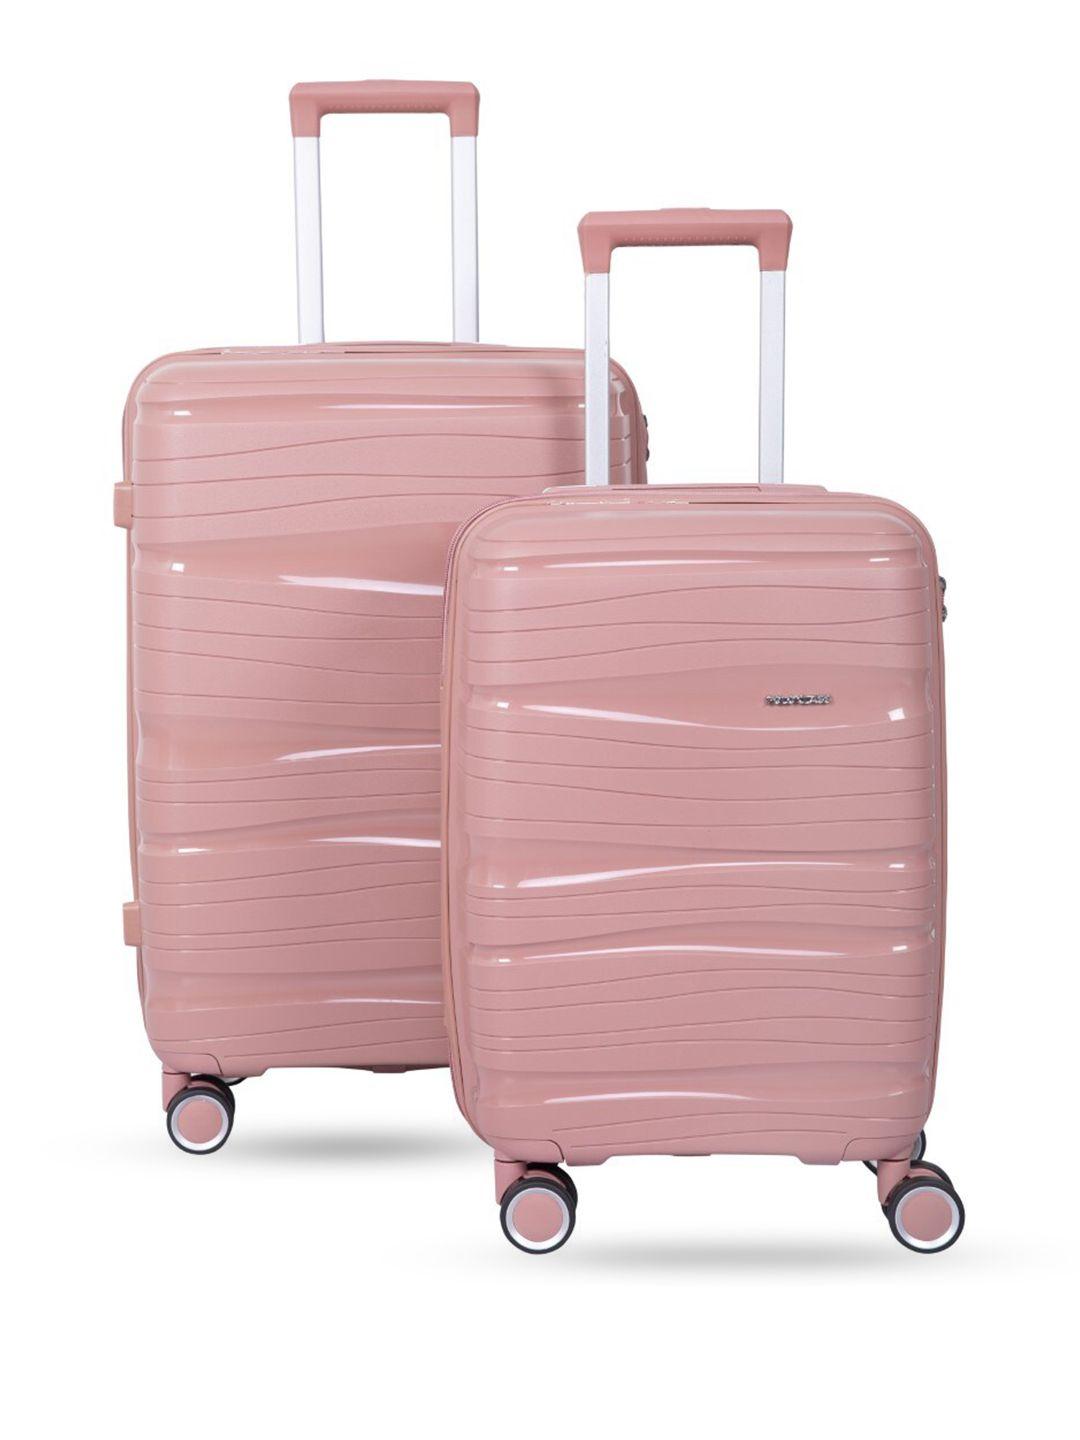 polo class set of 2 textured trolley suitcase-60.0l